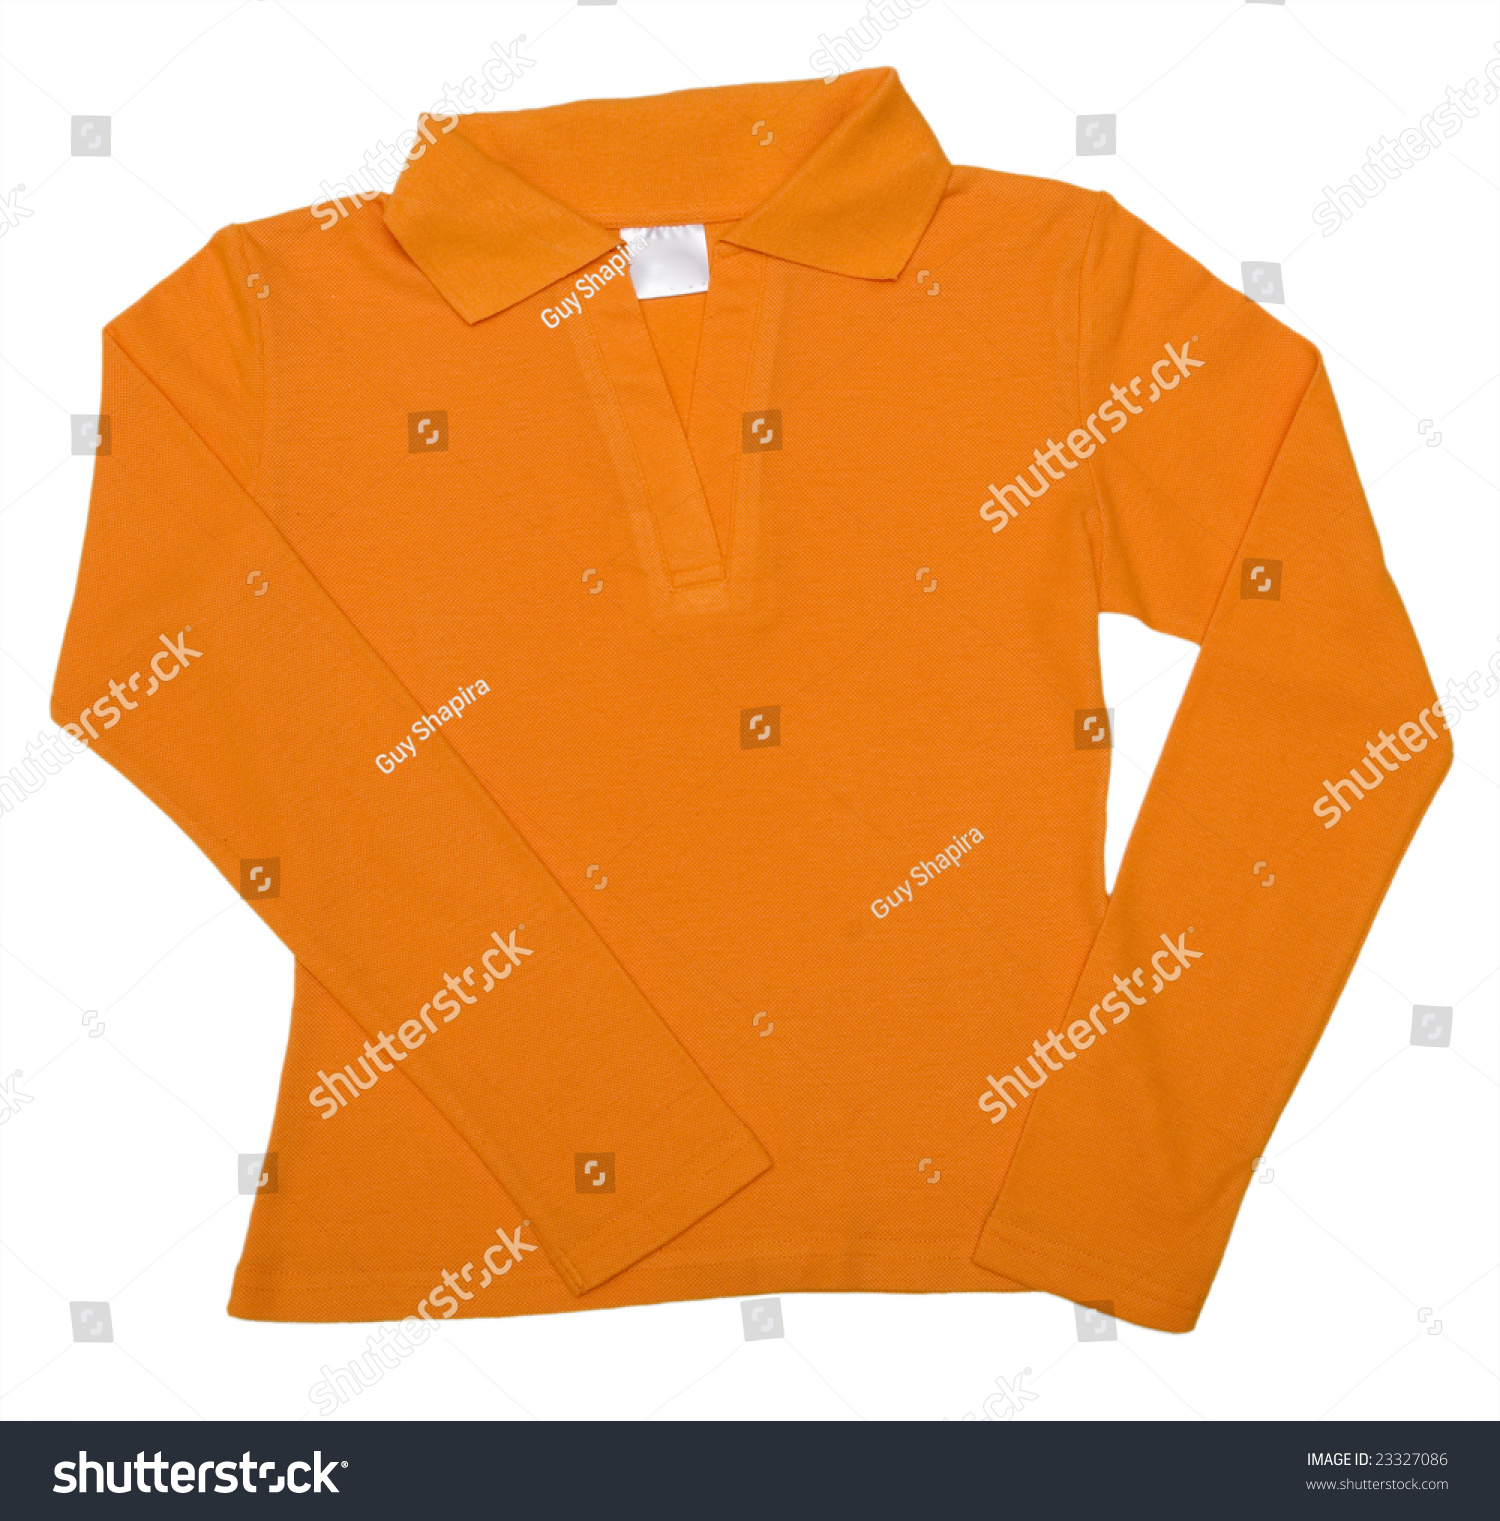 Shirt Isolated On The White Background Stock Photo 23327086 : Shutterstock